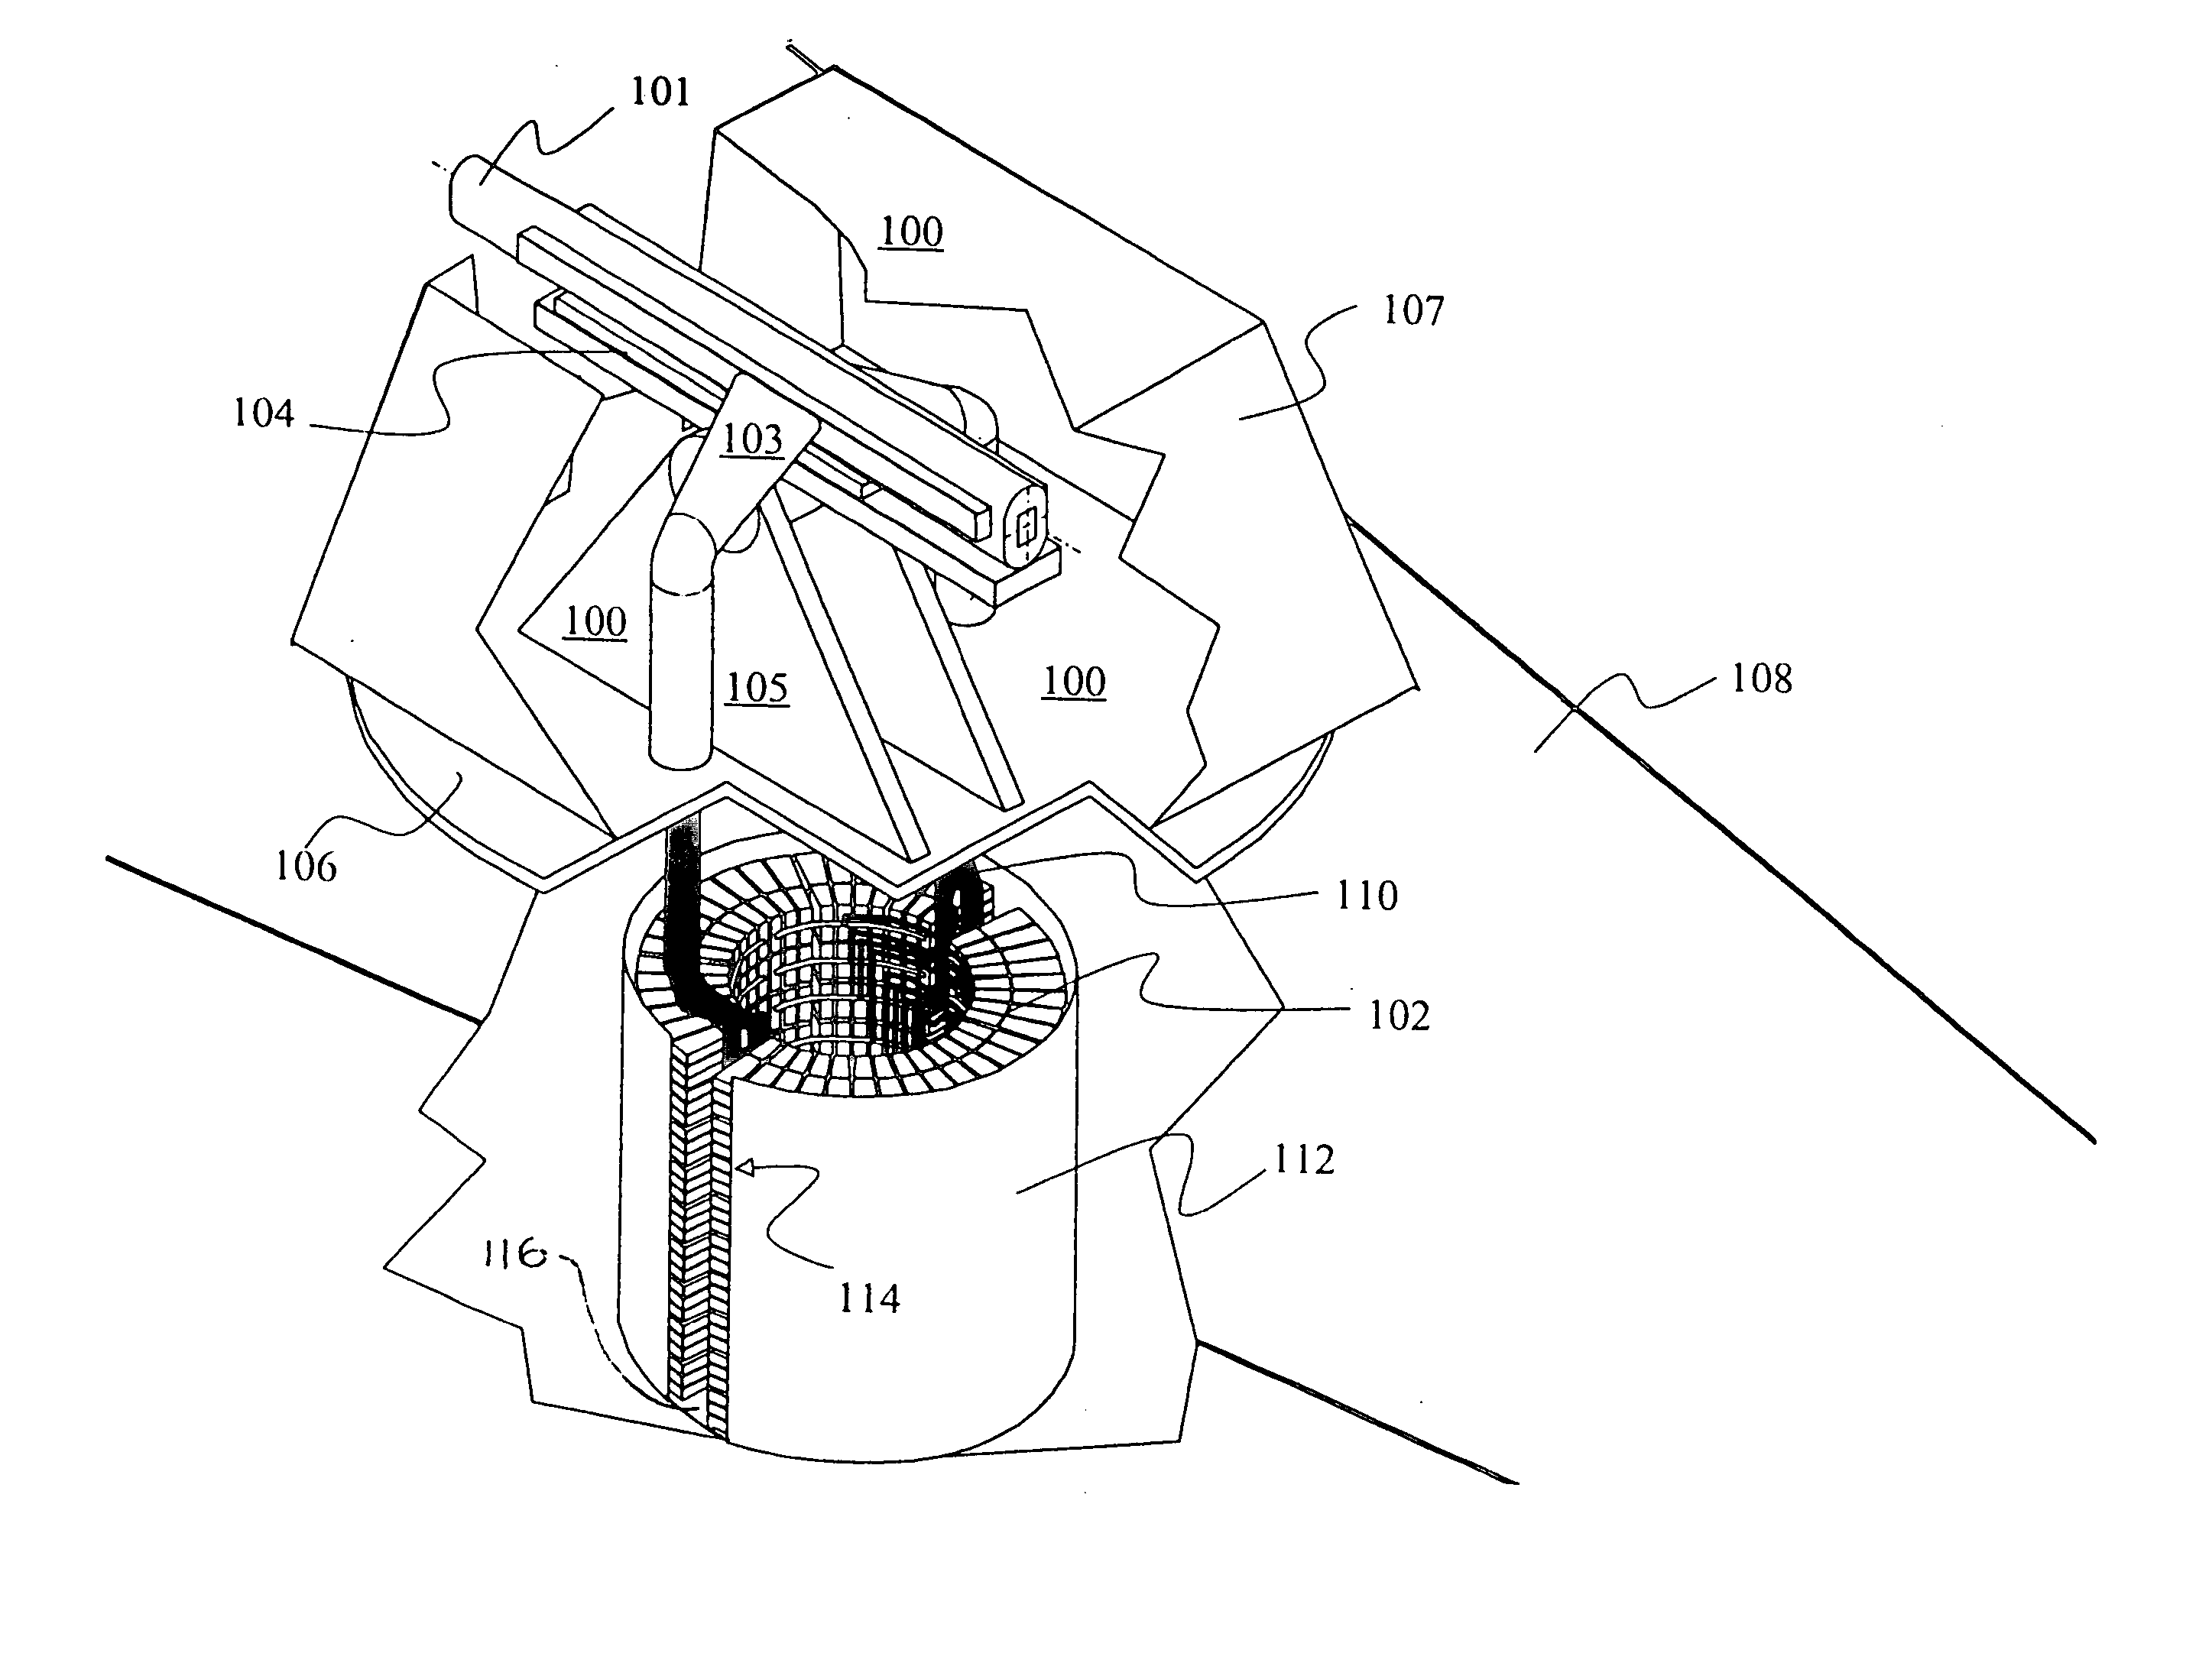 Method for shipboard operation of electromagnetic gun and rotating pulse forming network